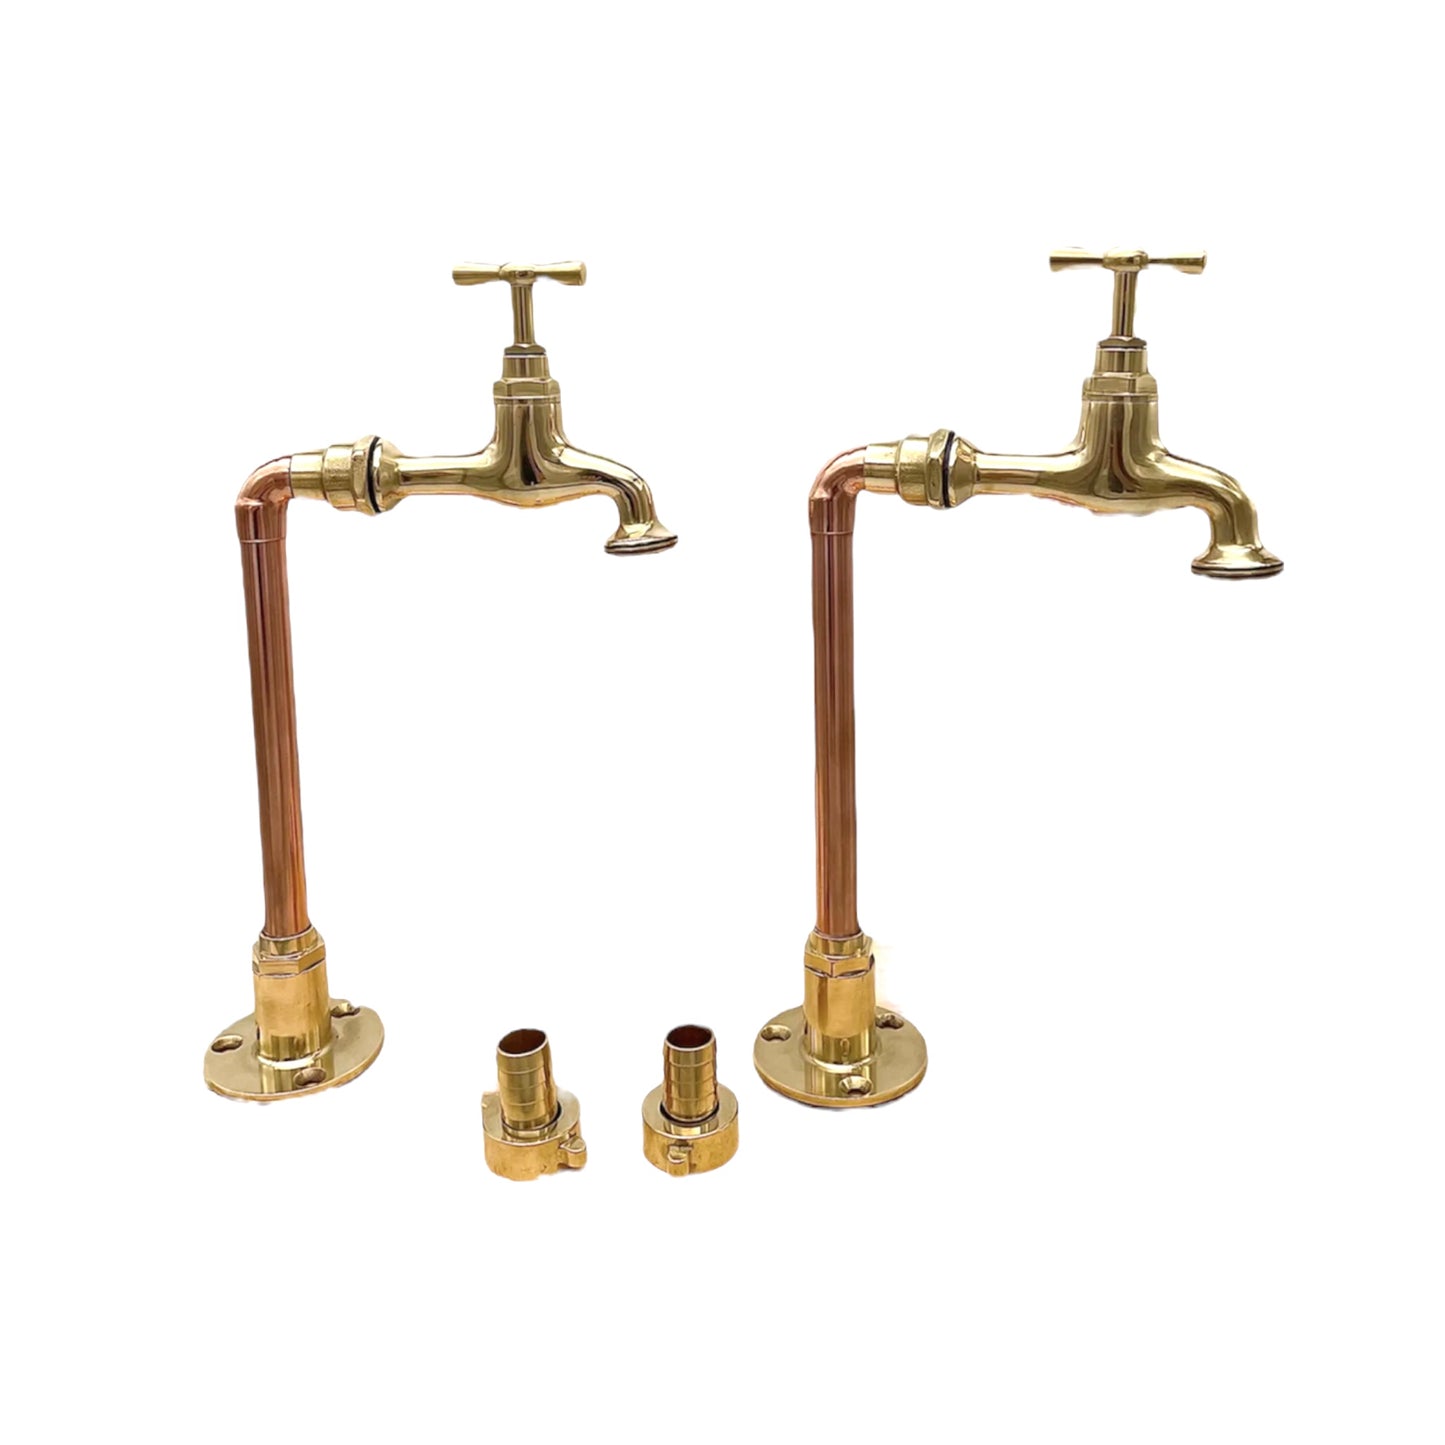 Copper and brass pillar kitchen taps sold by All Things French Store